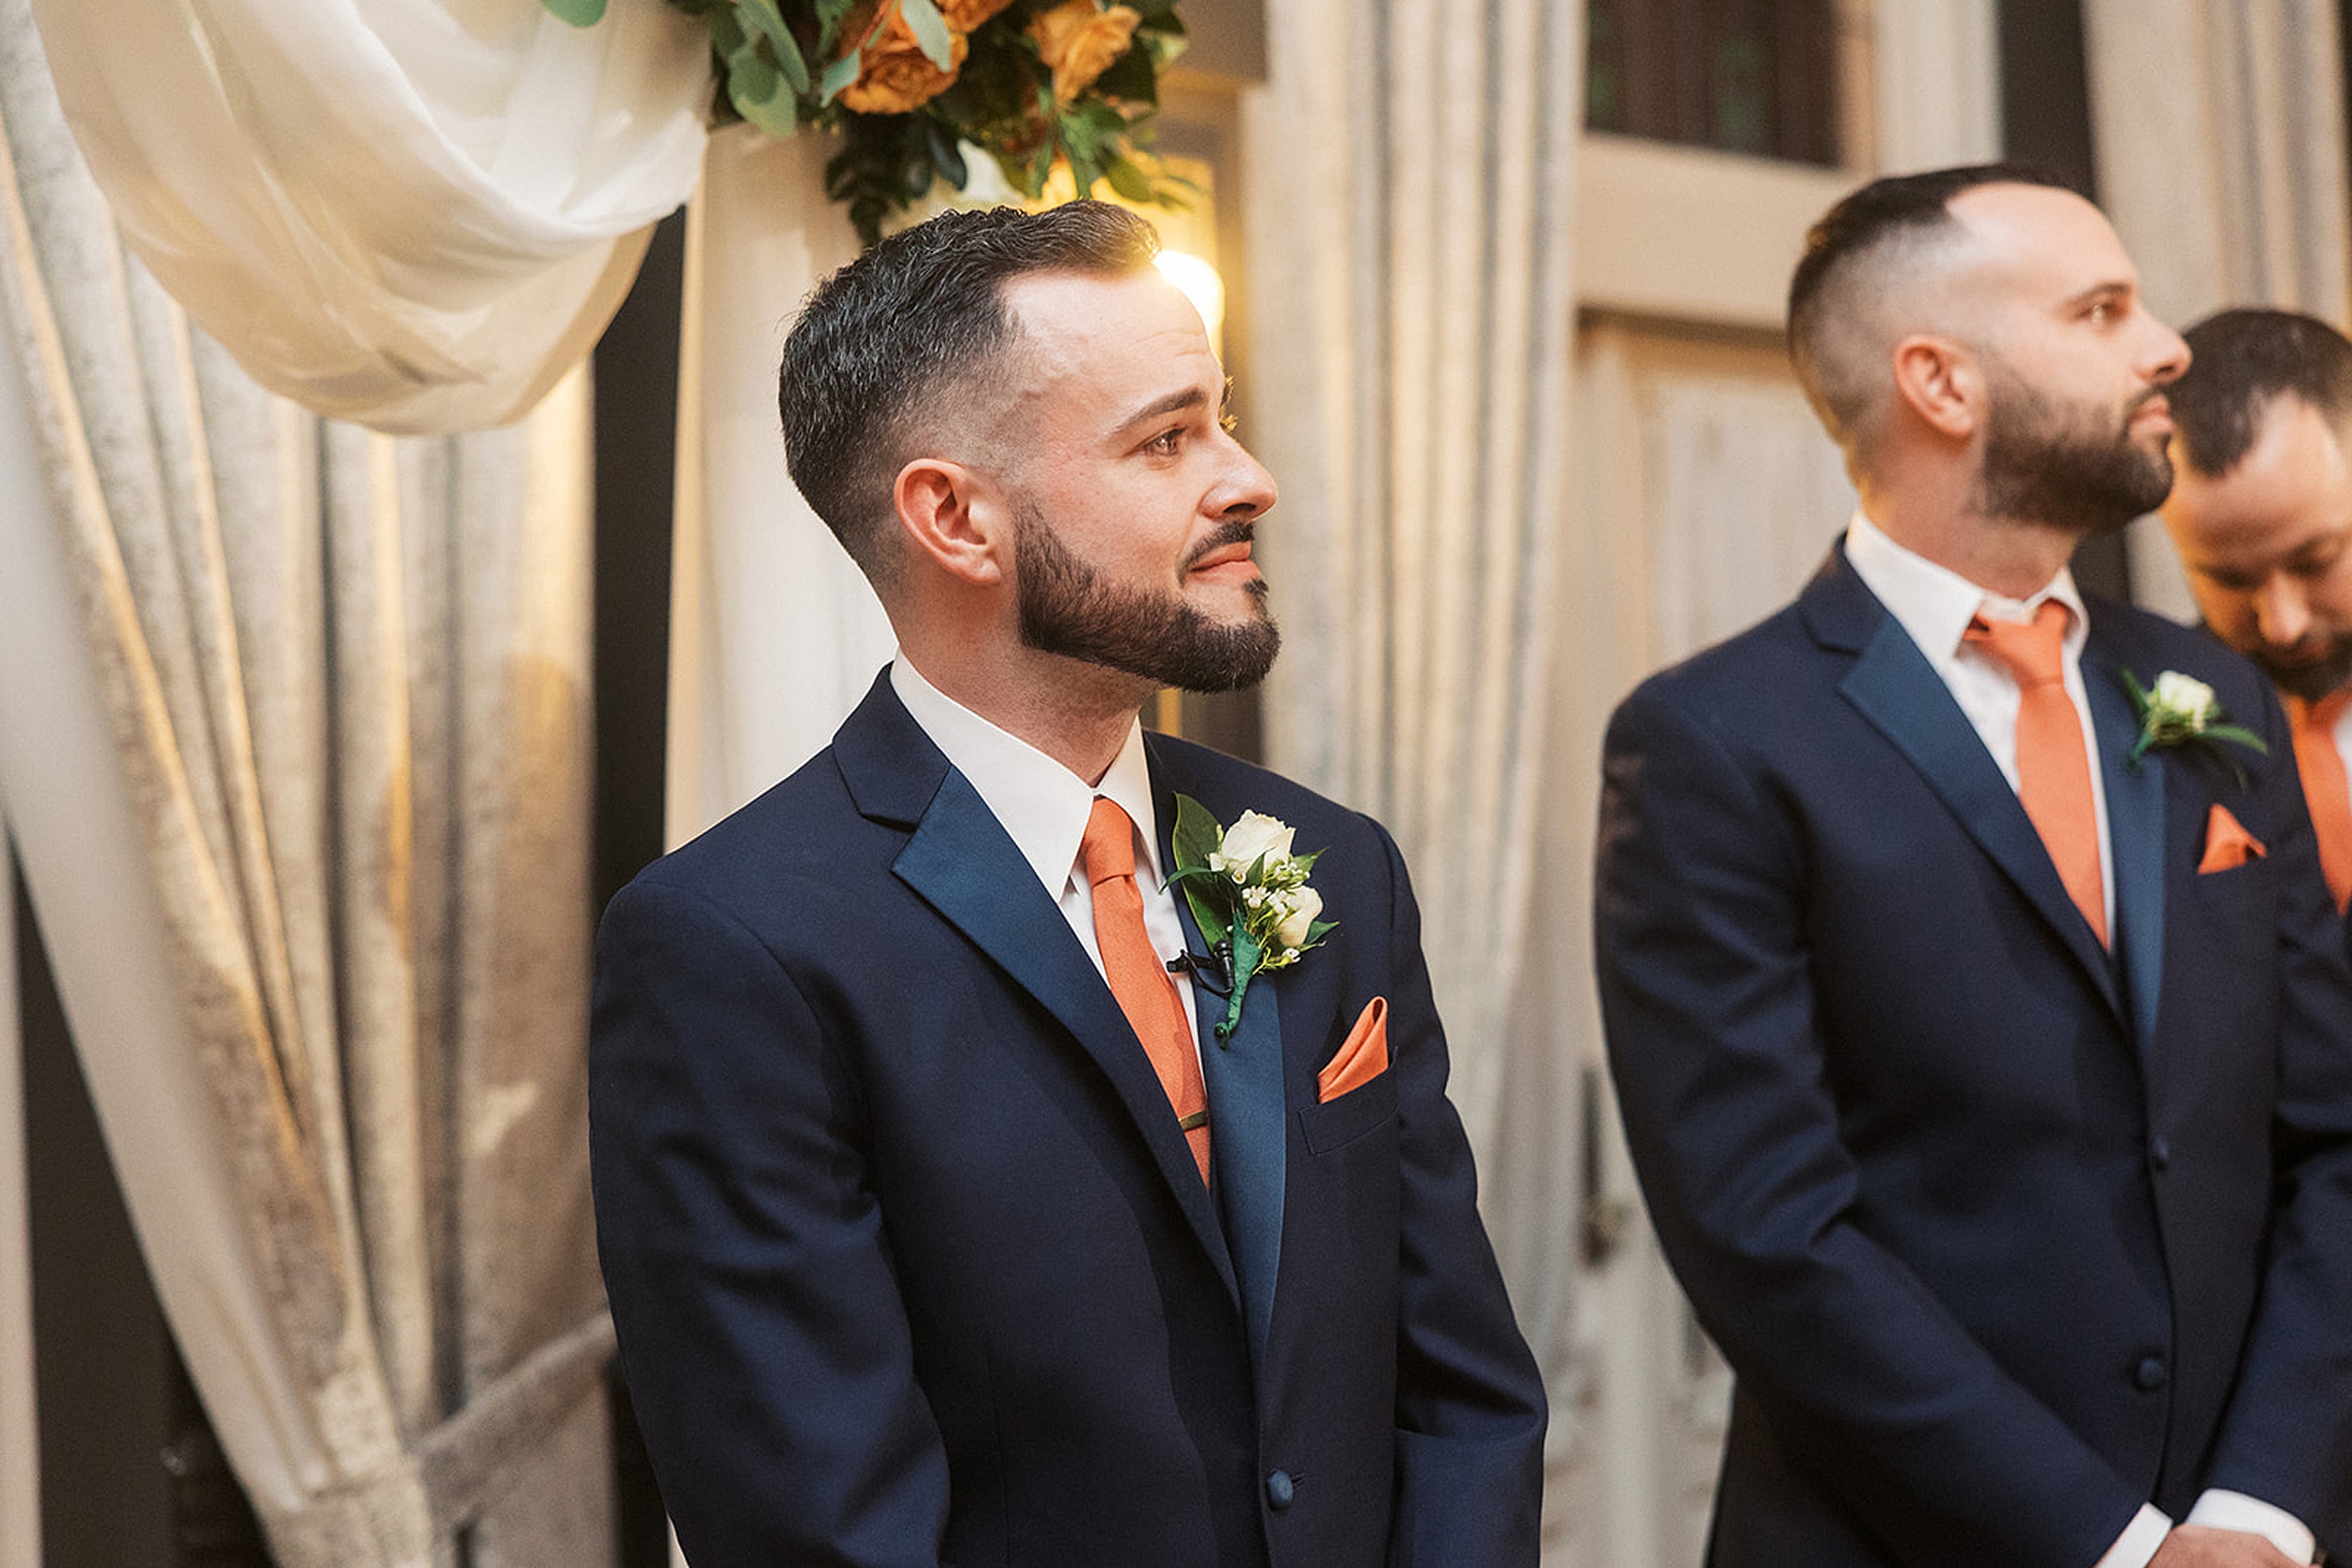 A groom looks out over the guests to his bride entering the ceremony